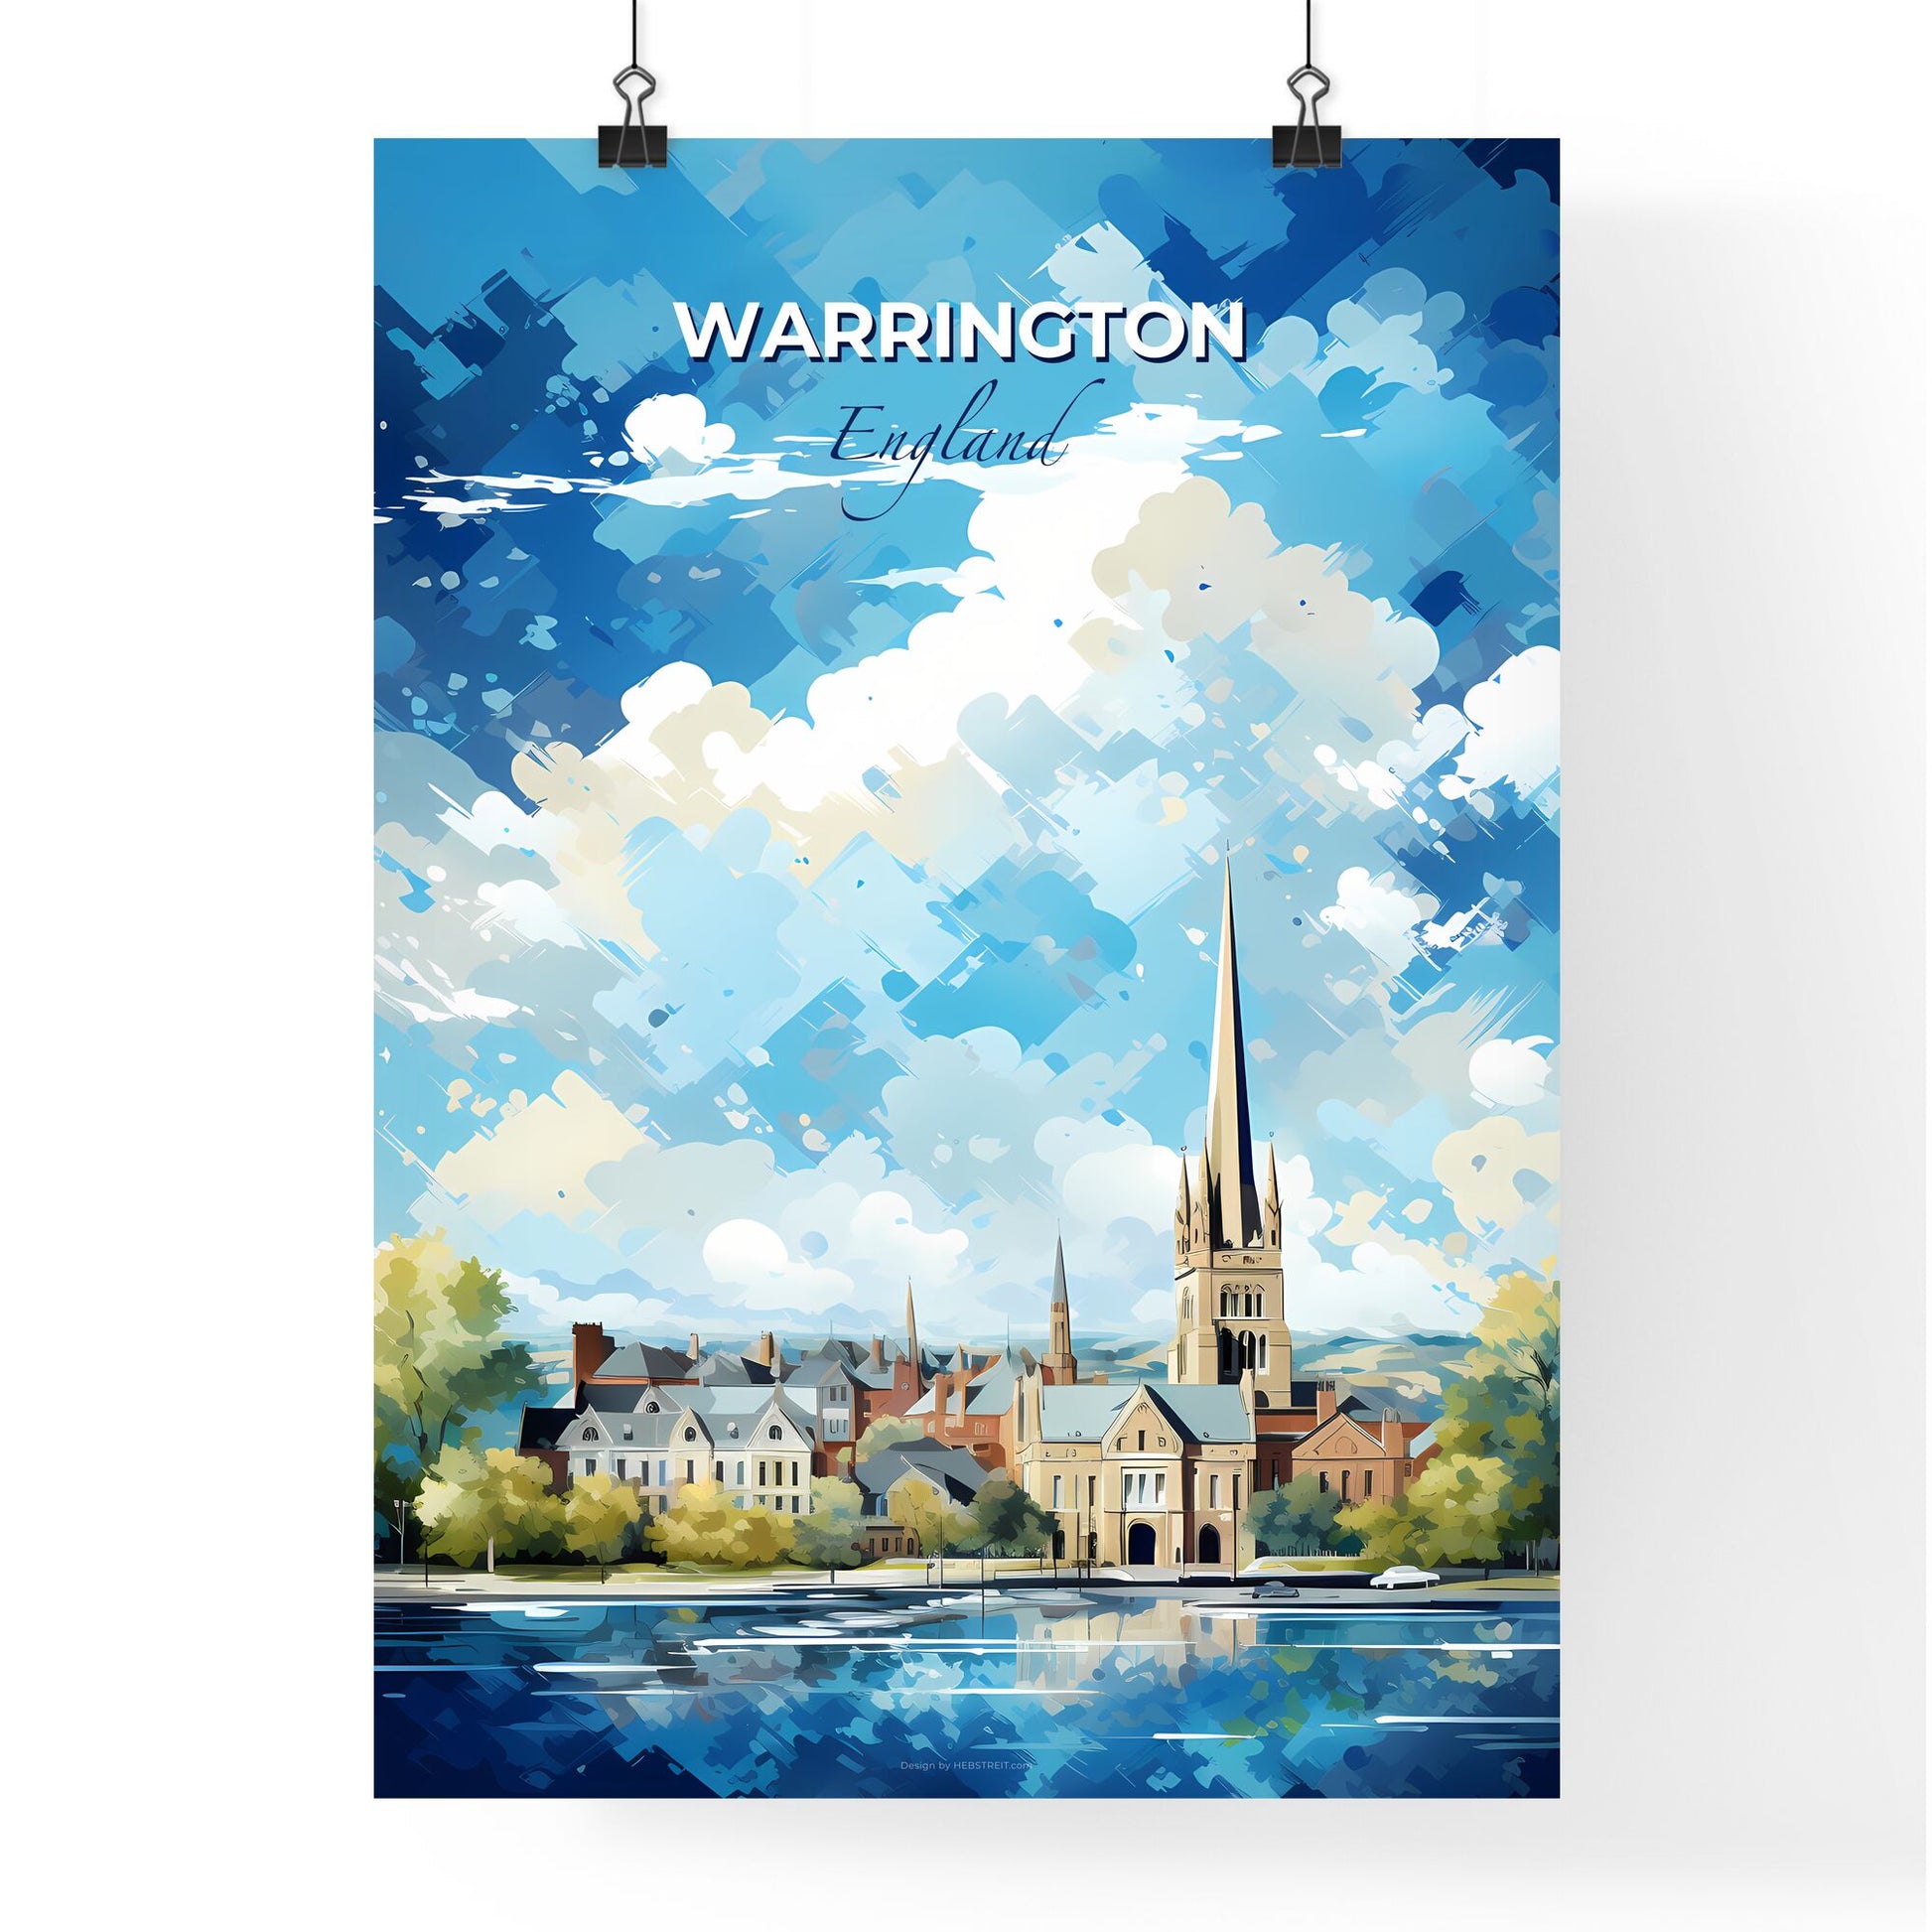 Warrington England Skyline - A City With A Tall Tower And Trees - Customizable Travel Gift Default Title